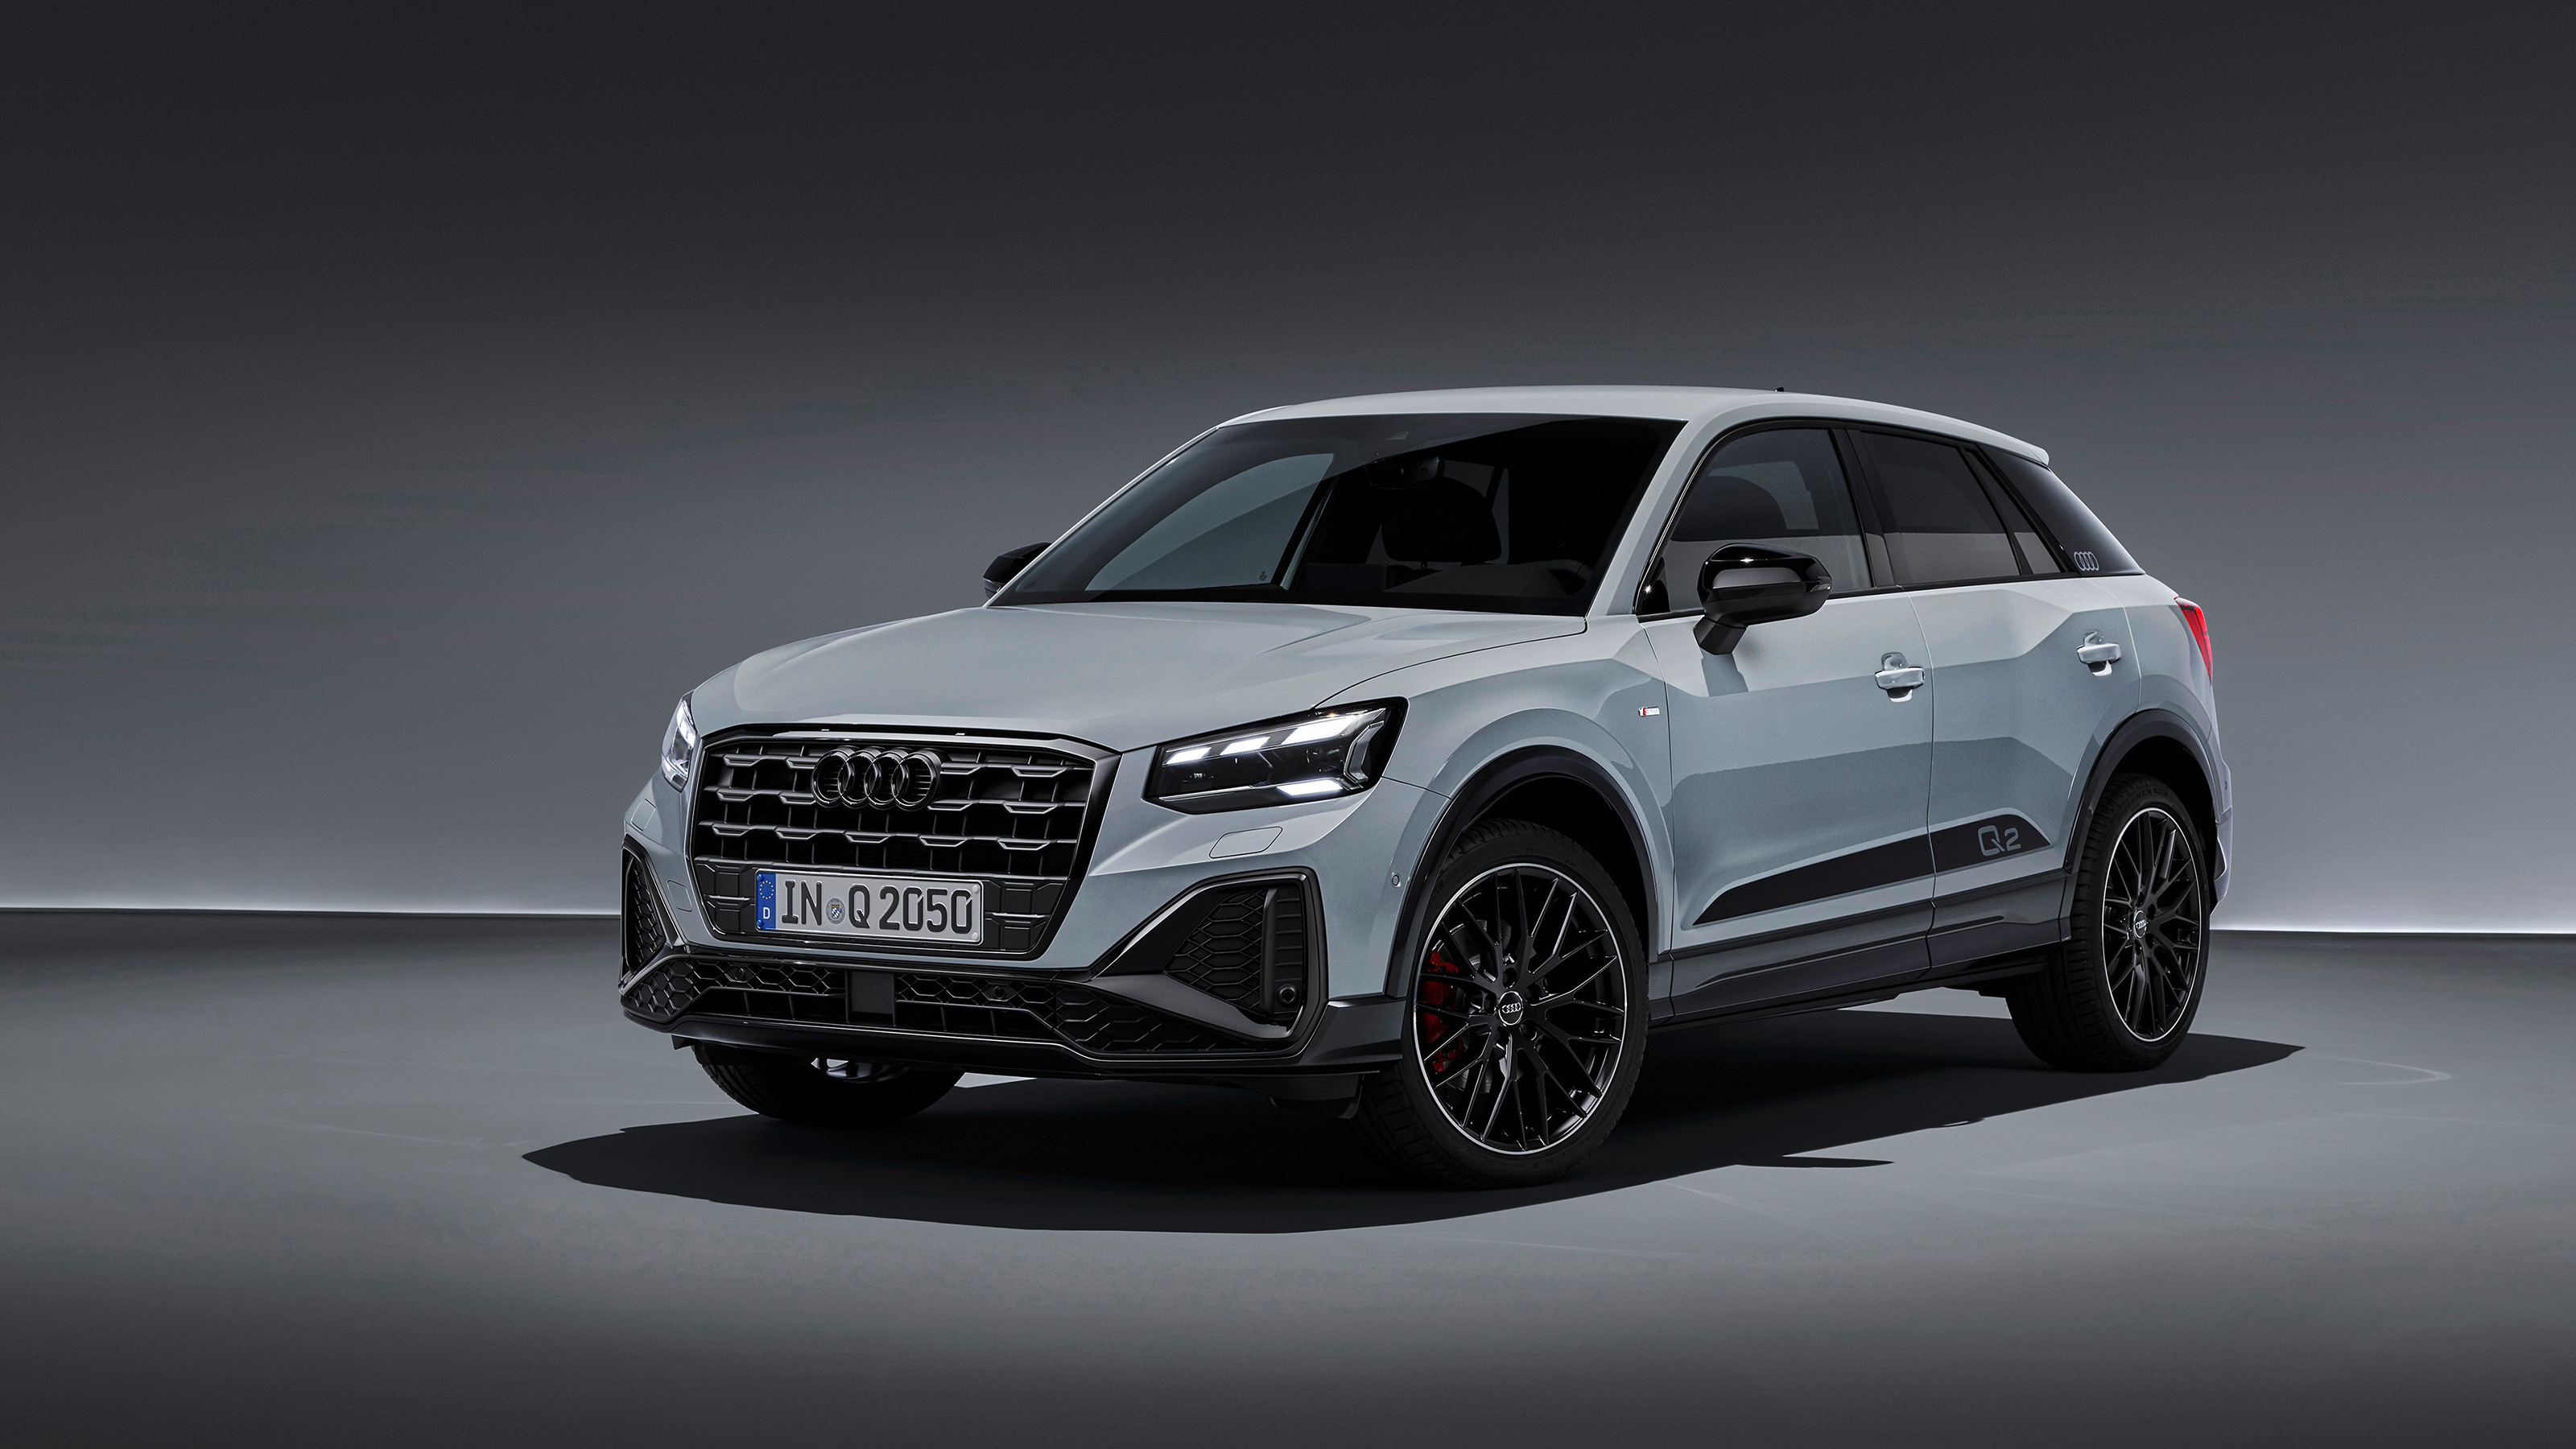 Audi Q2 SUV given minor facelift for 2020  Auto Express